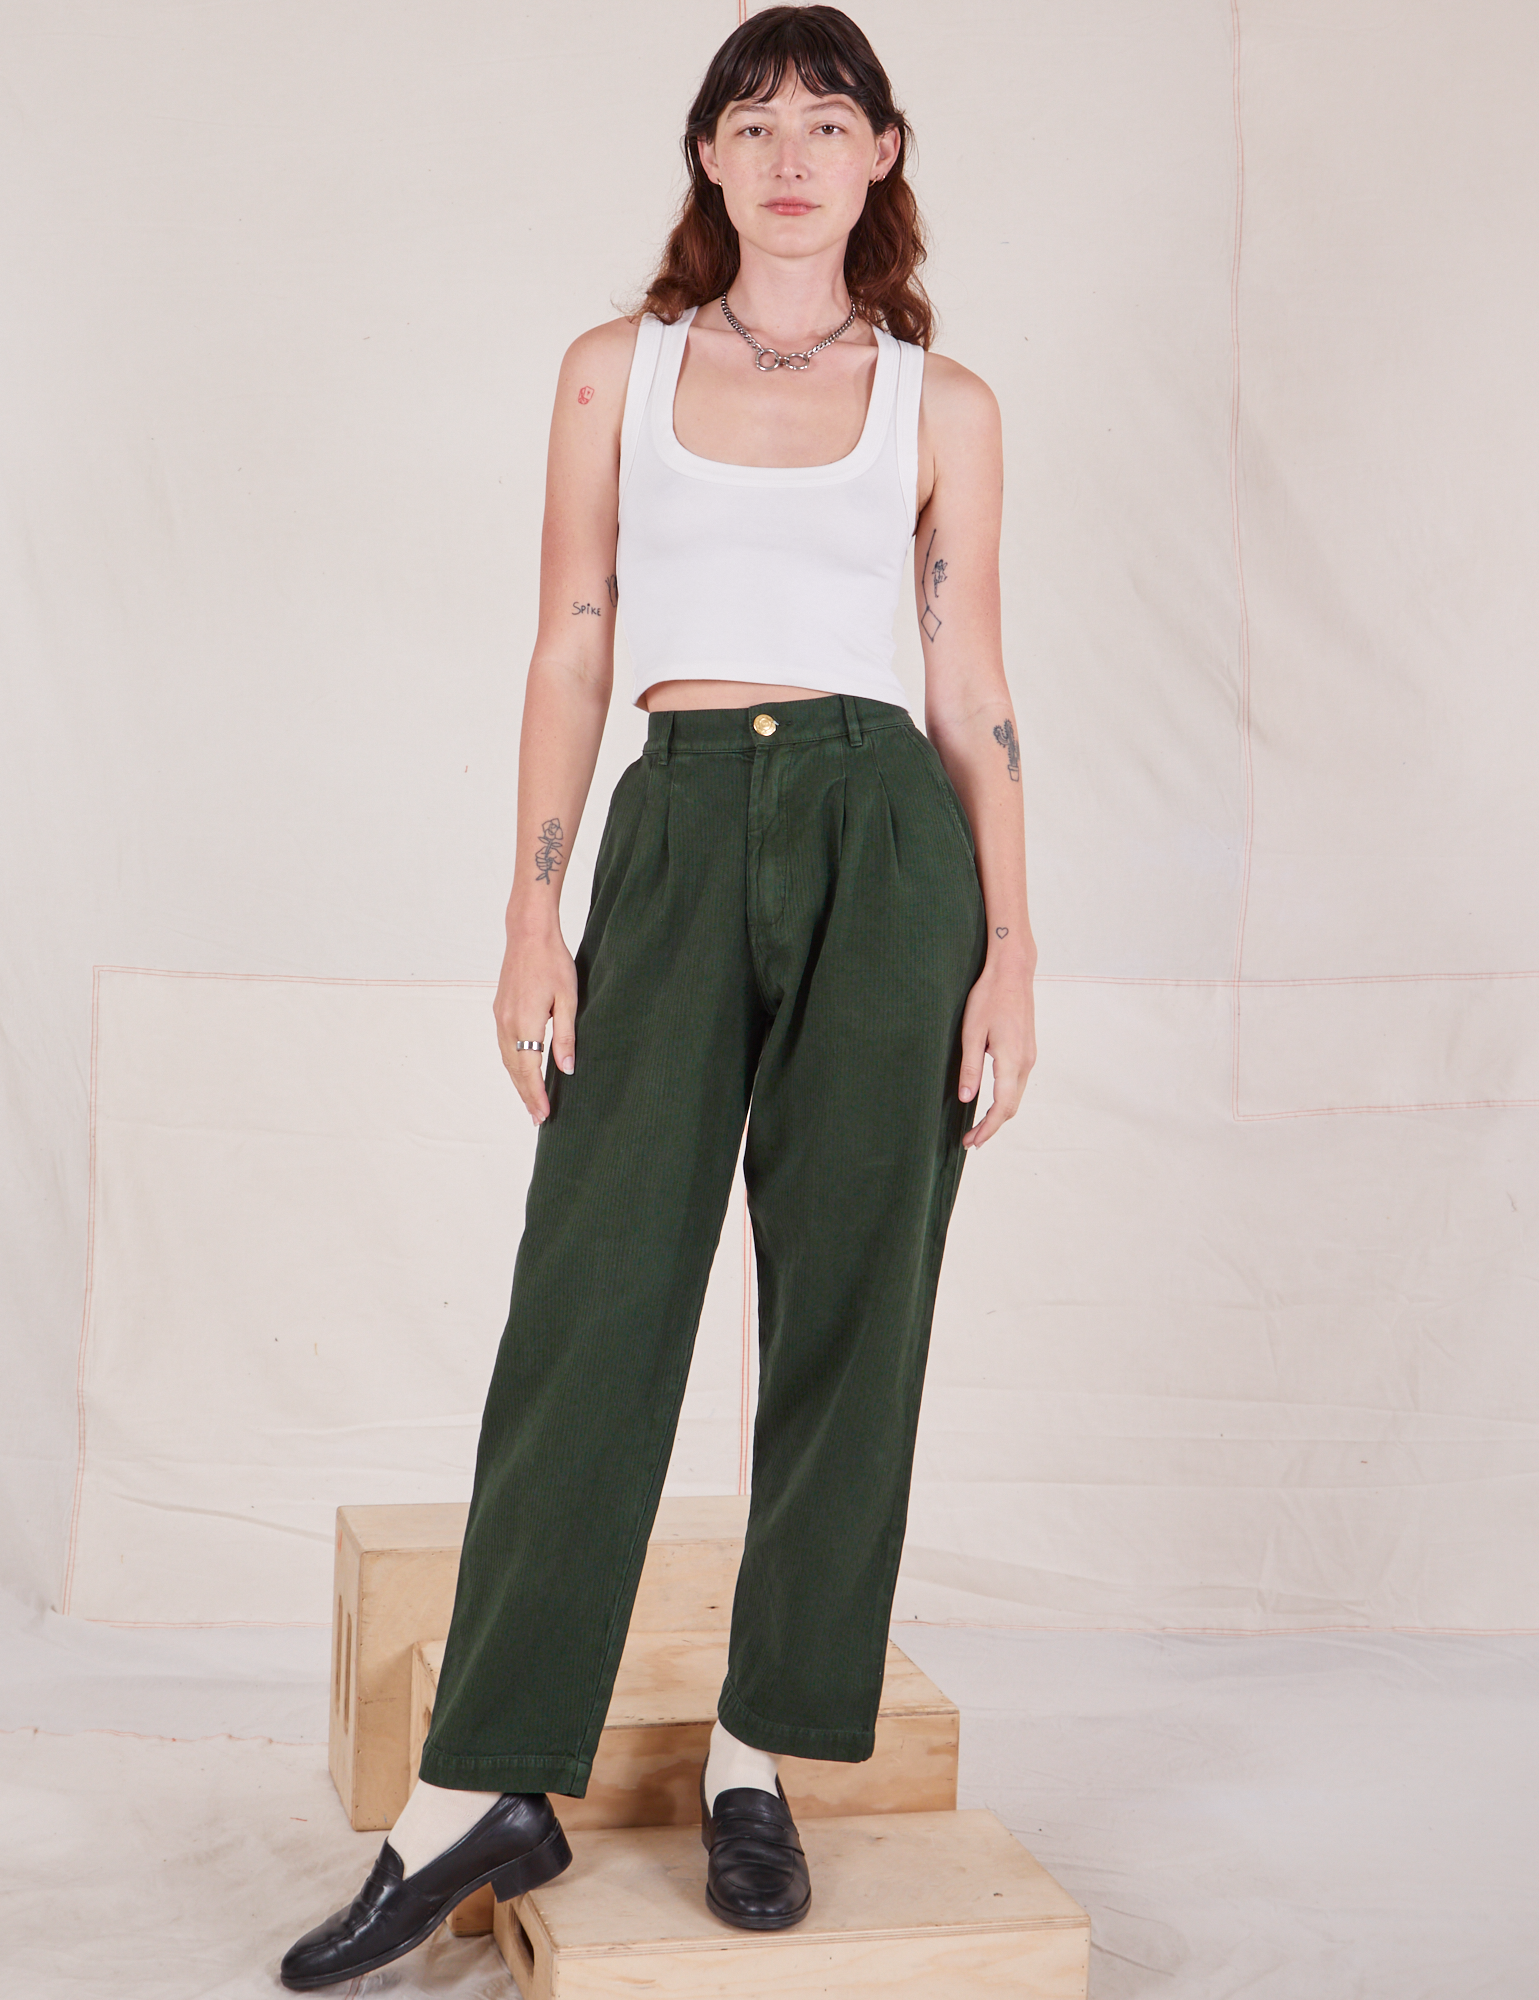 Alex is wearing Heritage Trousers in Swamp Green and a vintage off-white Cropped Tank Top